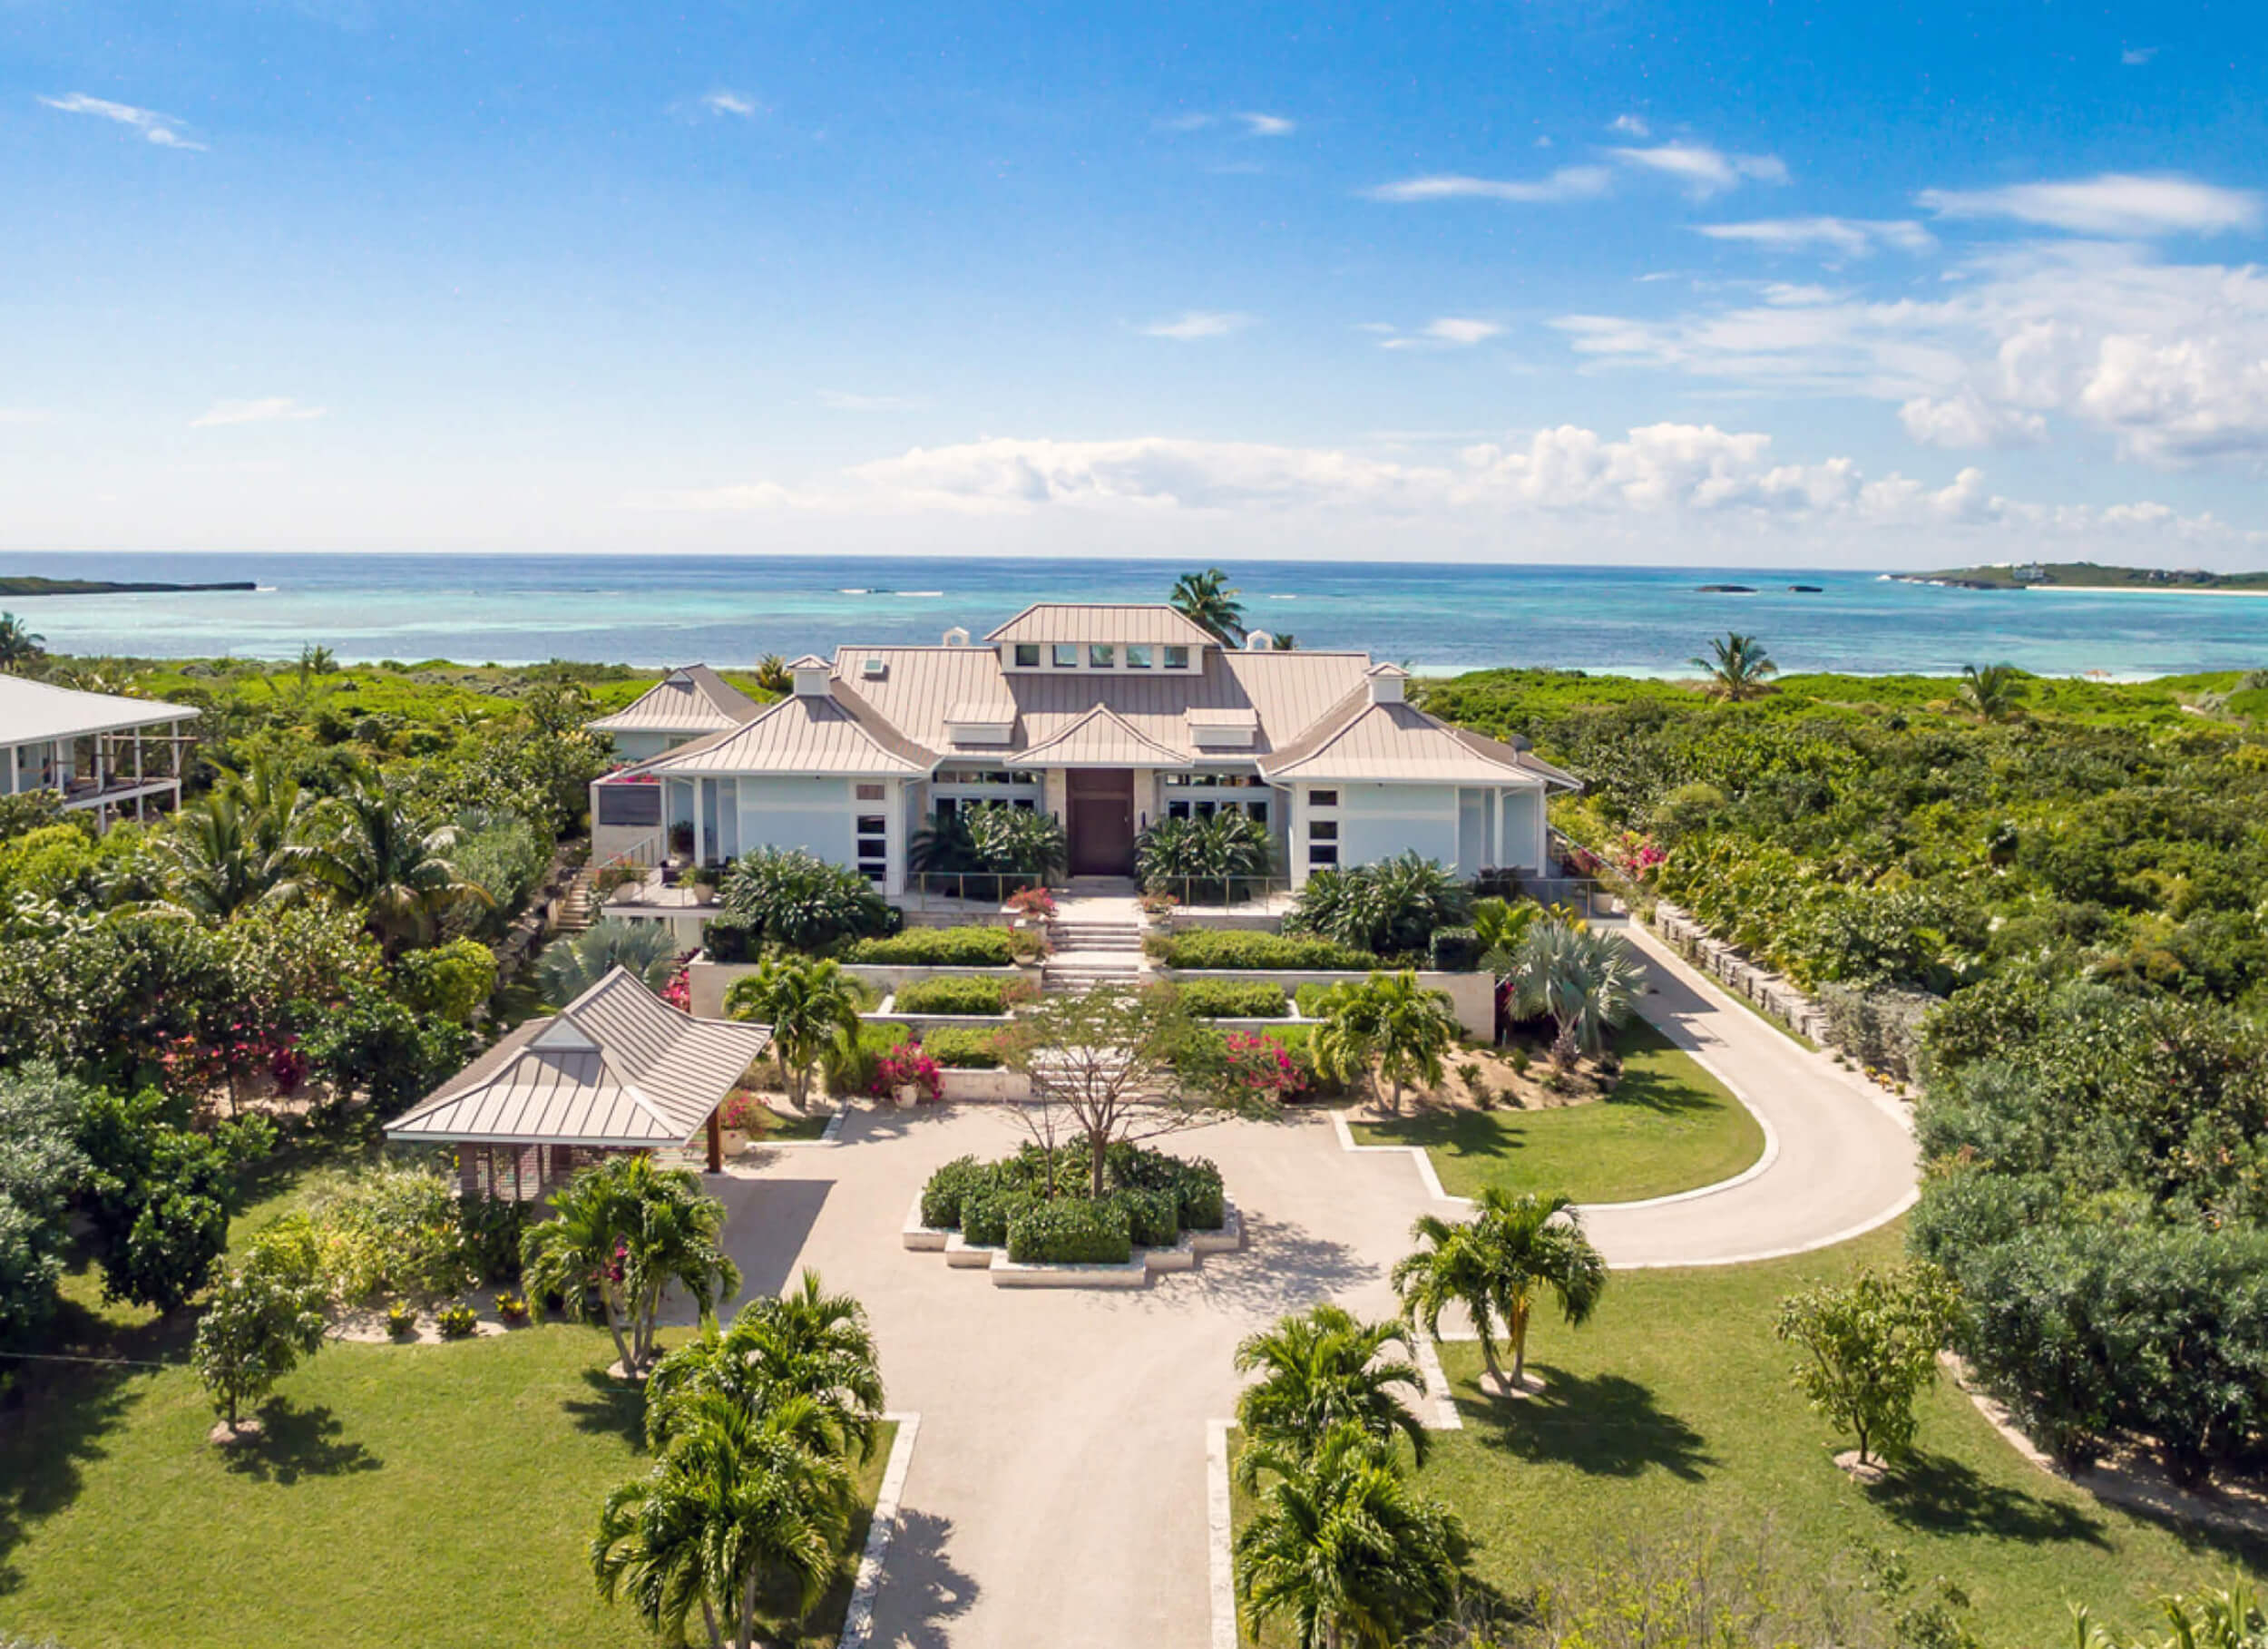 The Abaco Club aerial image